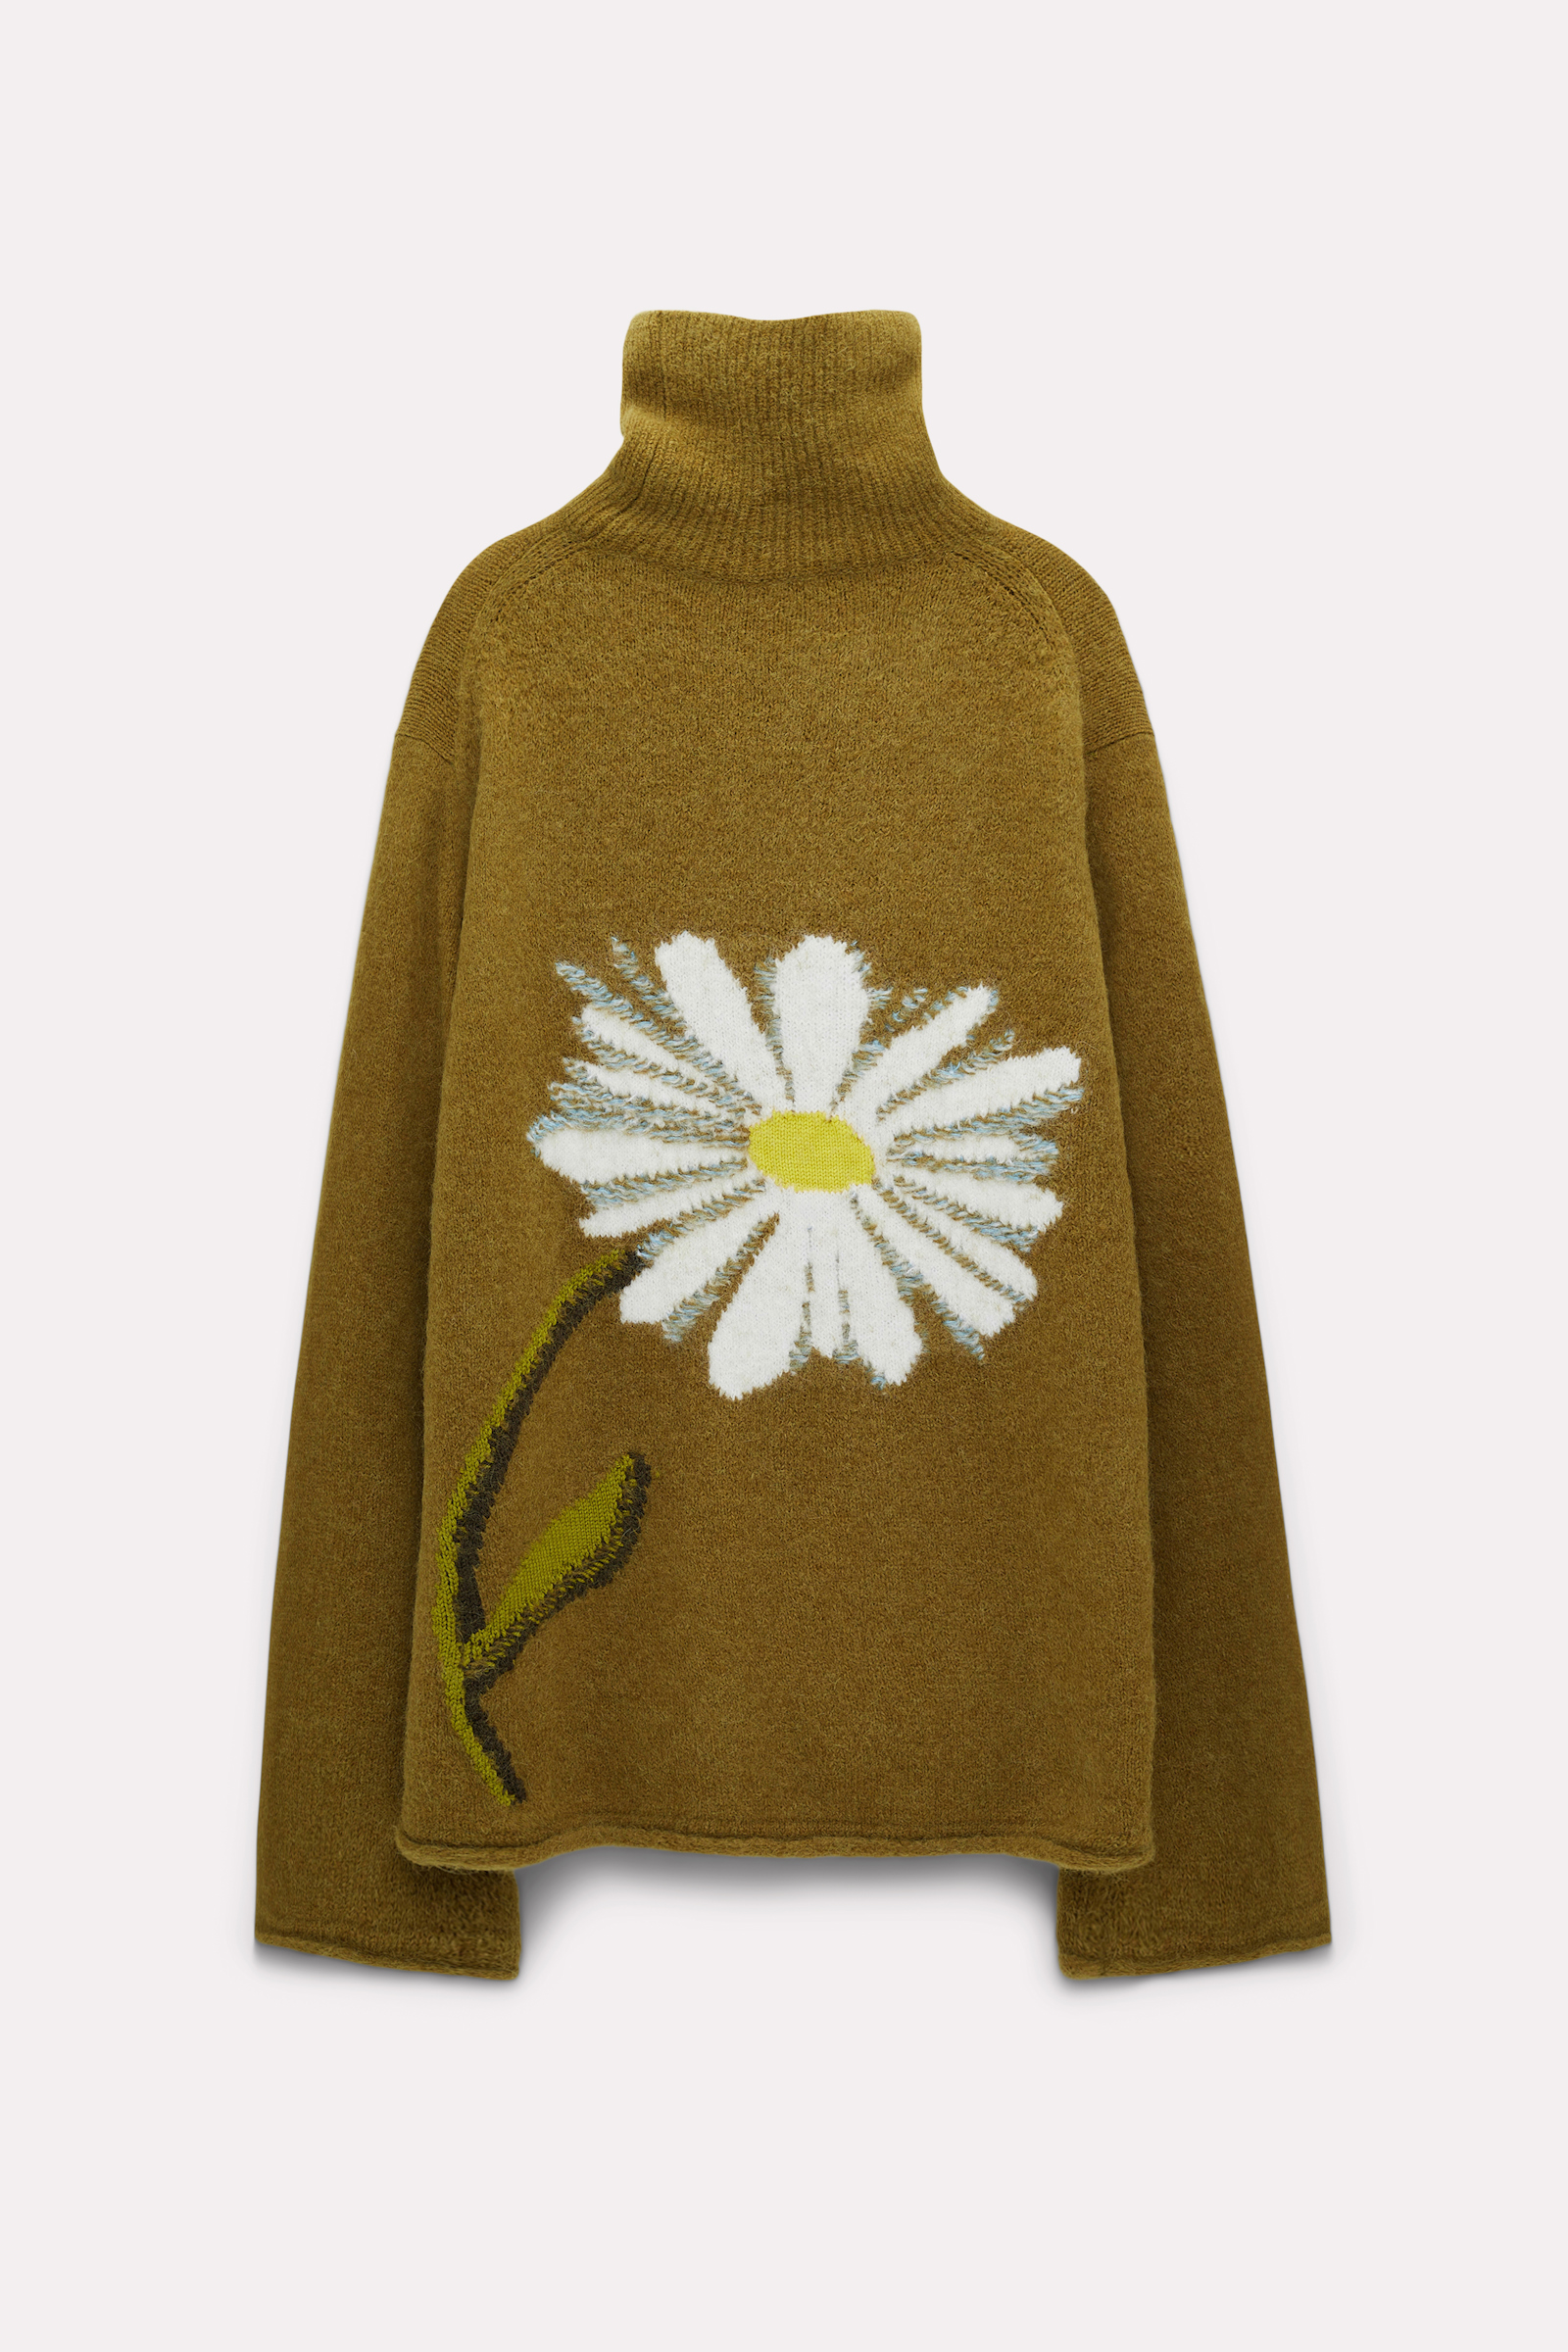 Dorothee Schumacher Turtleneck pullover with intarsia knit flower whispering green